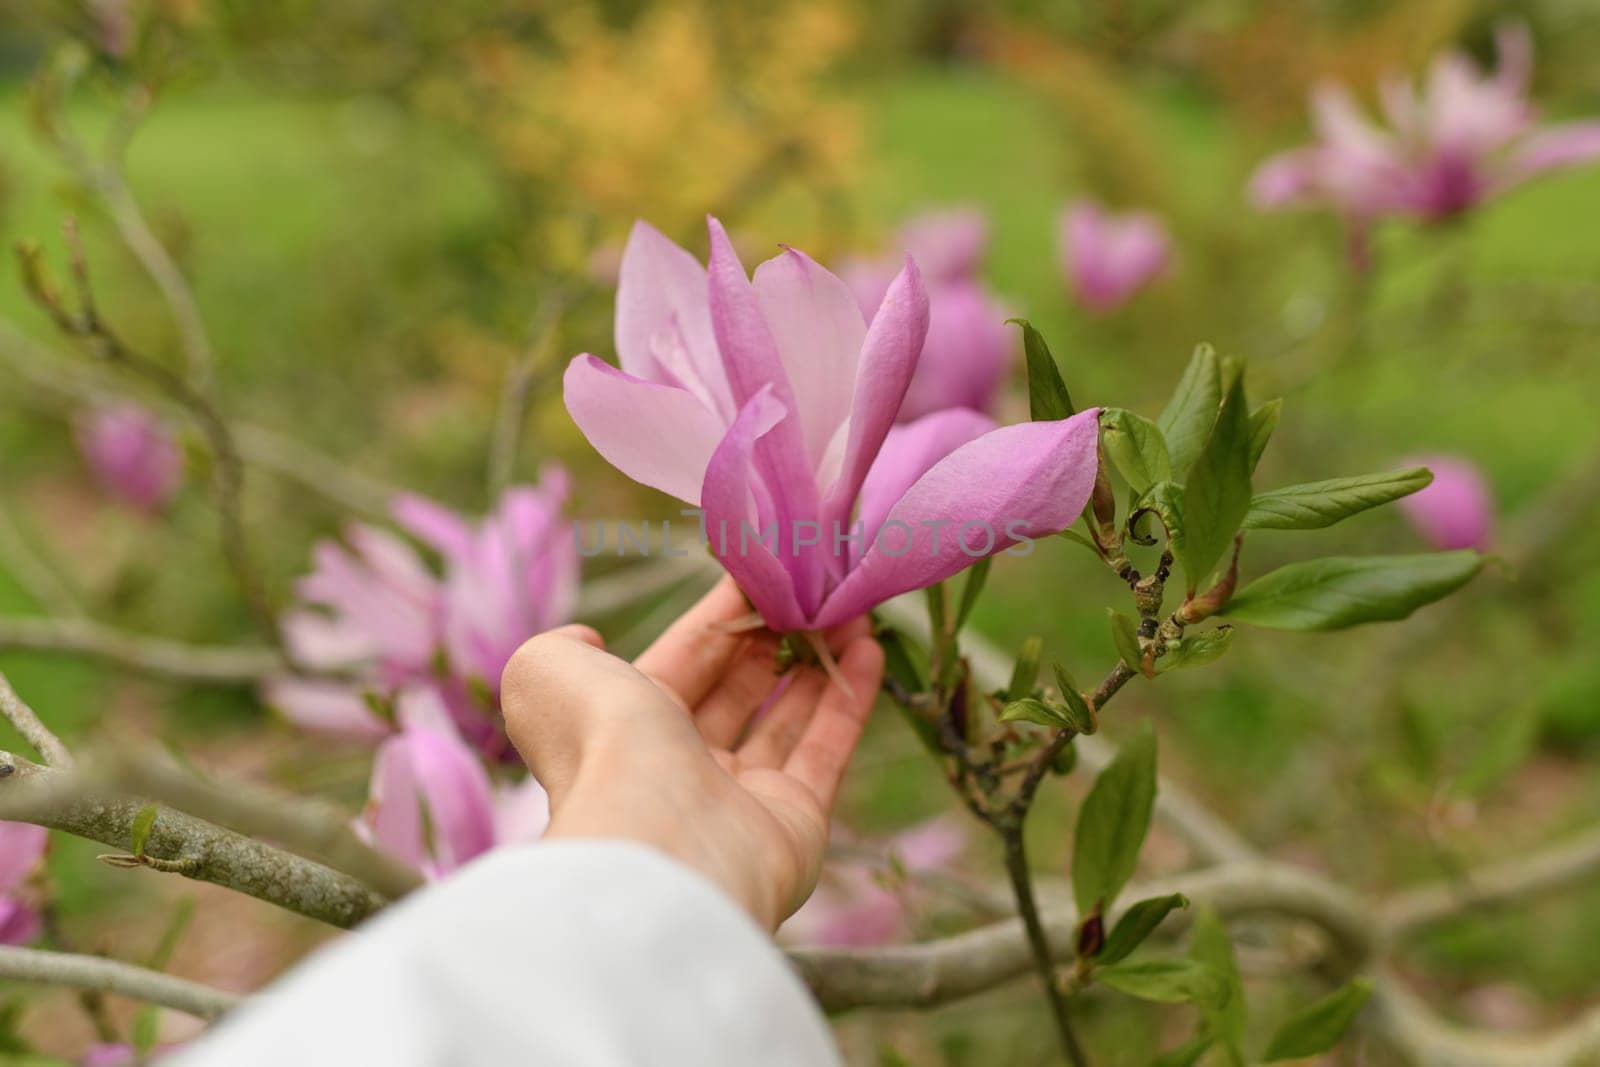 A woman's hand touches a magnolia flower on a tree